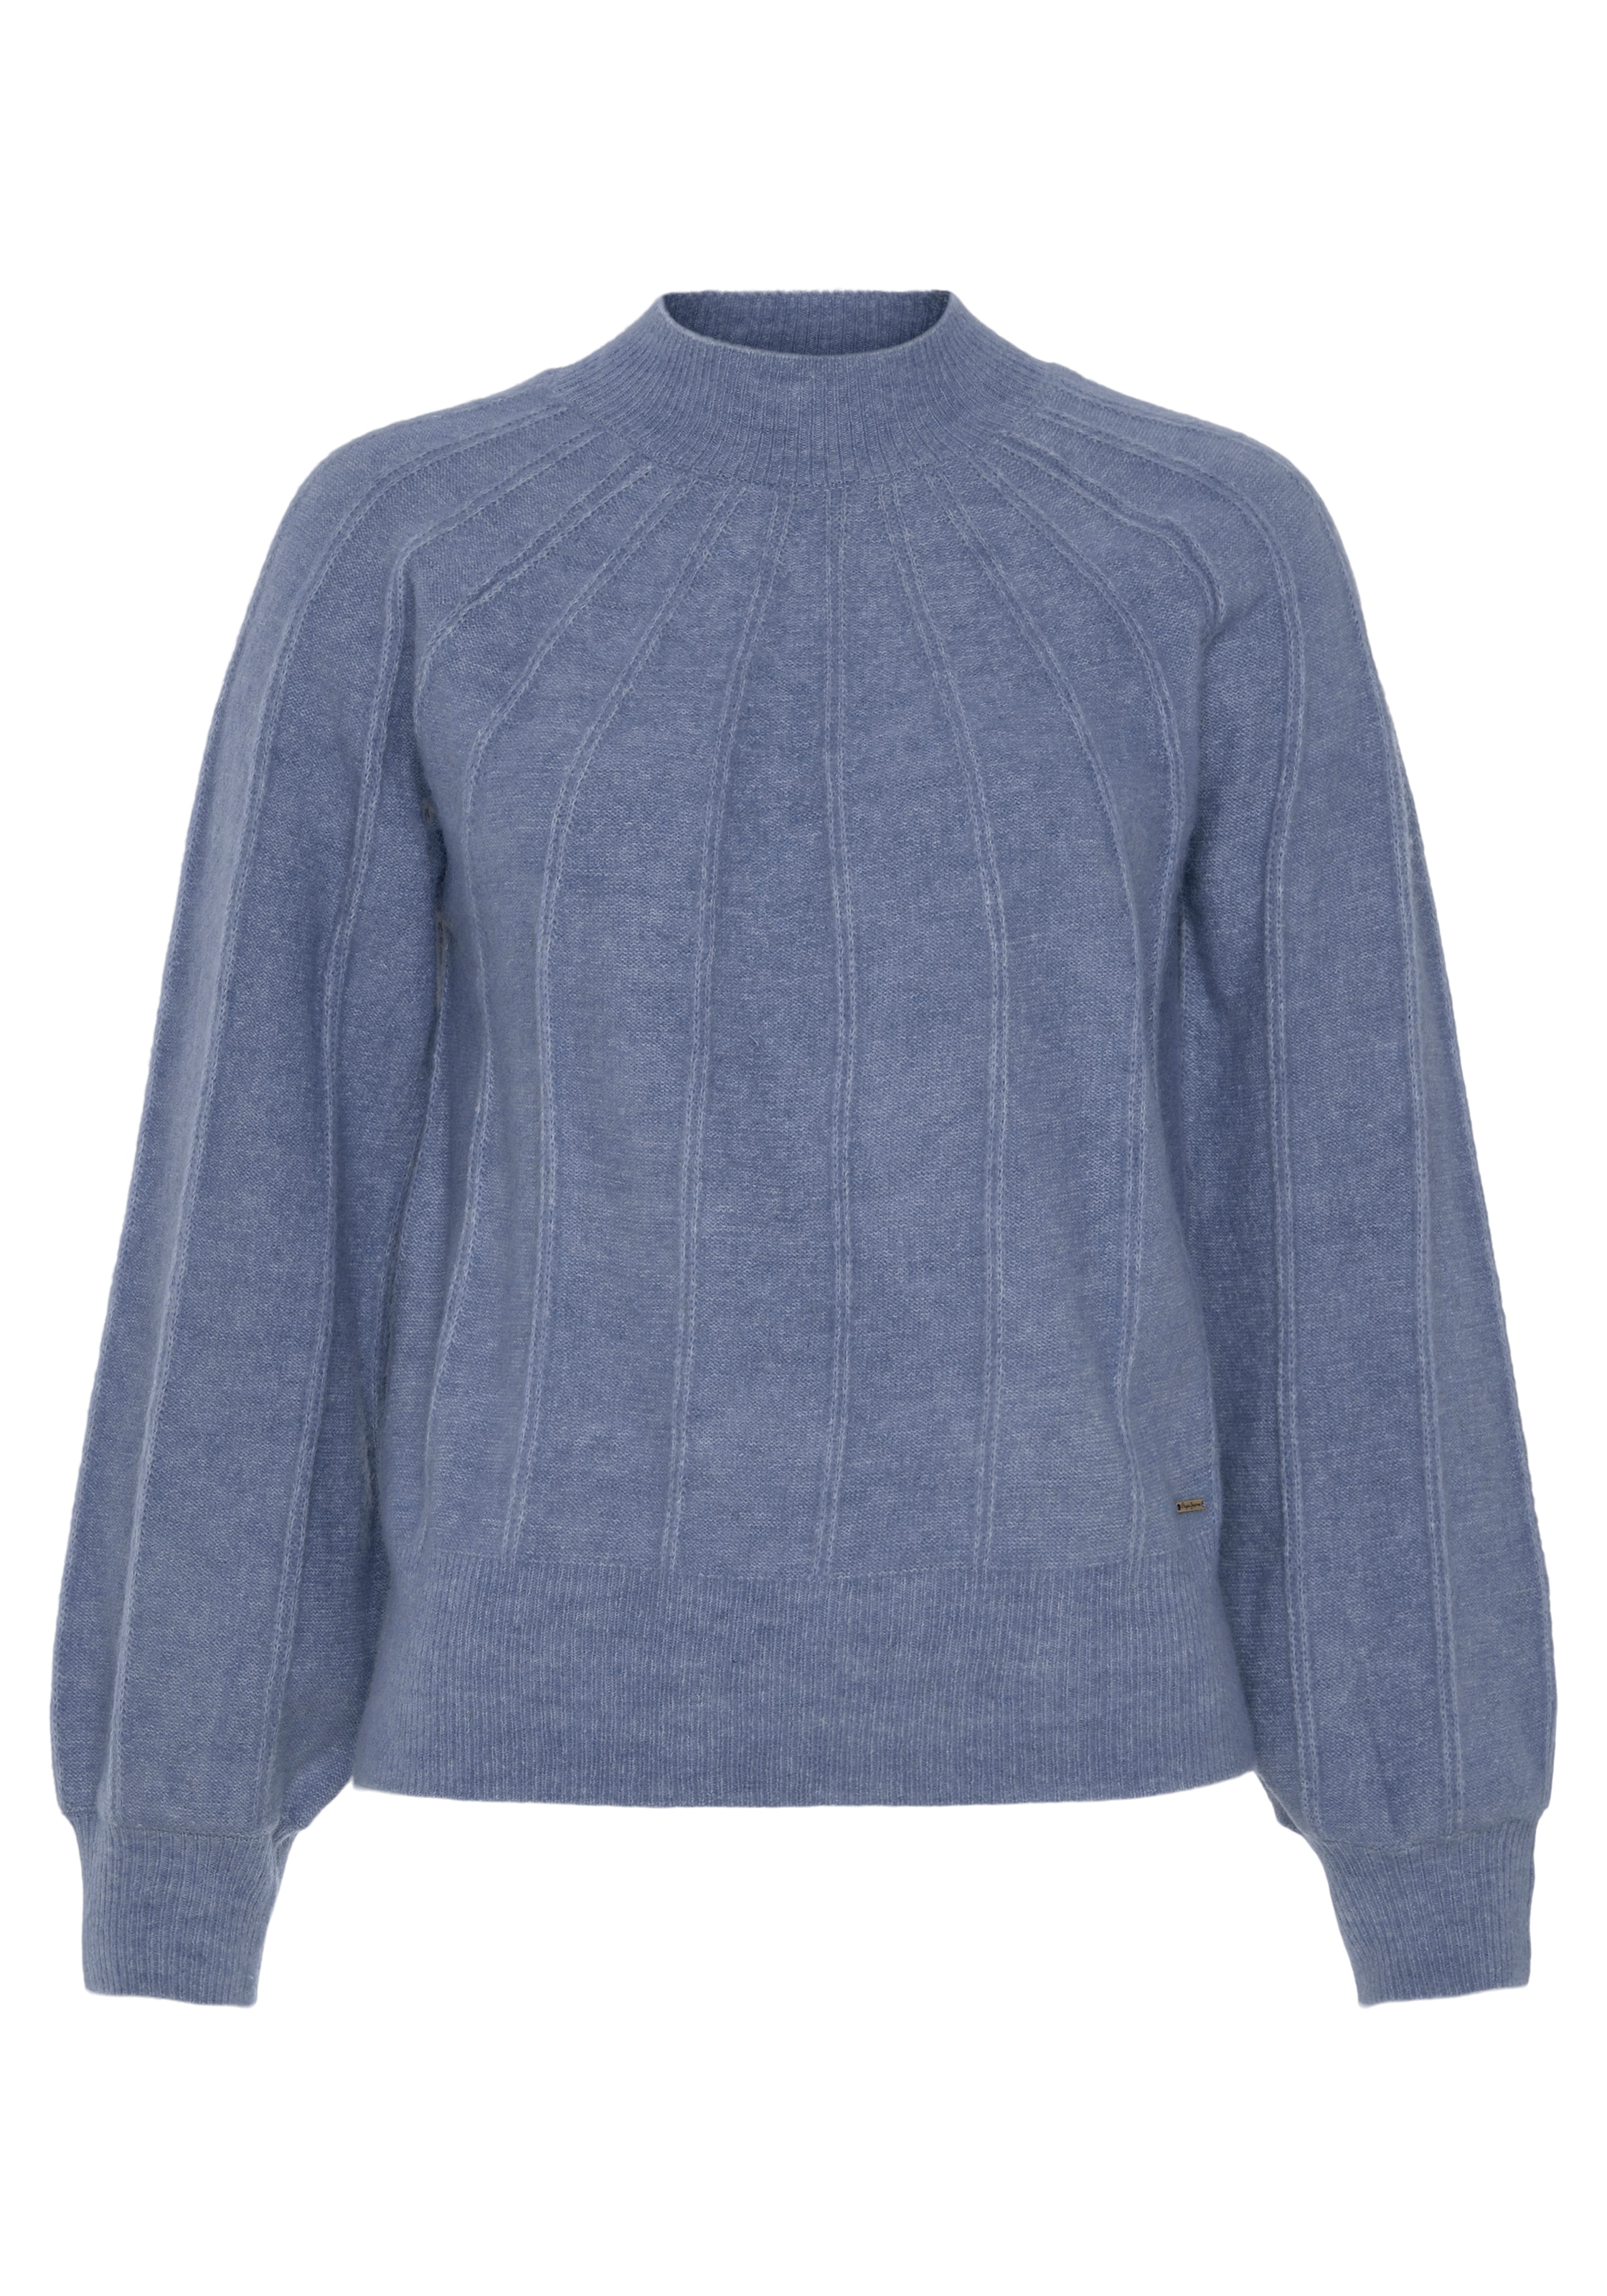 Pepe Jeans Strickpullover »KENDALL RO«, (1 tlg.)